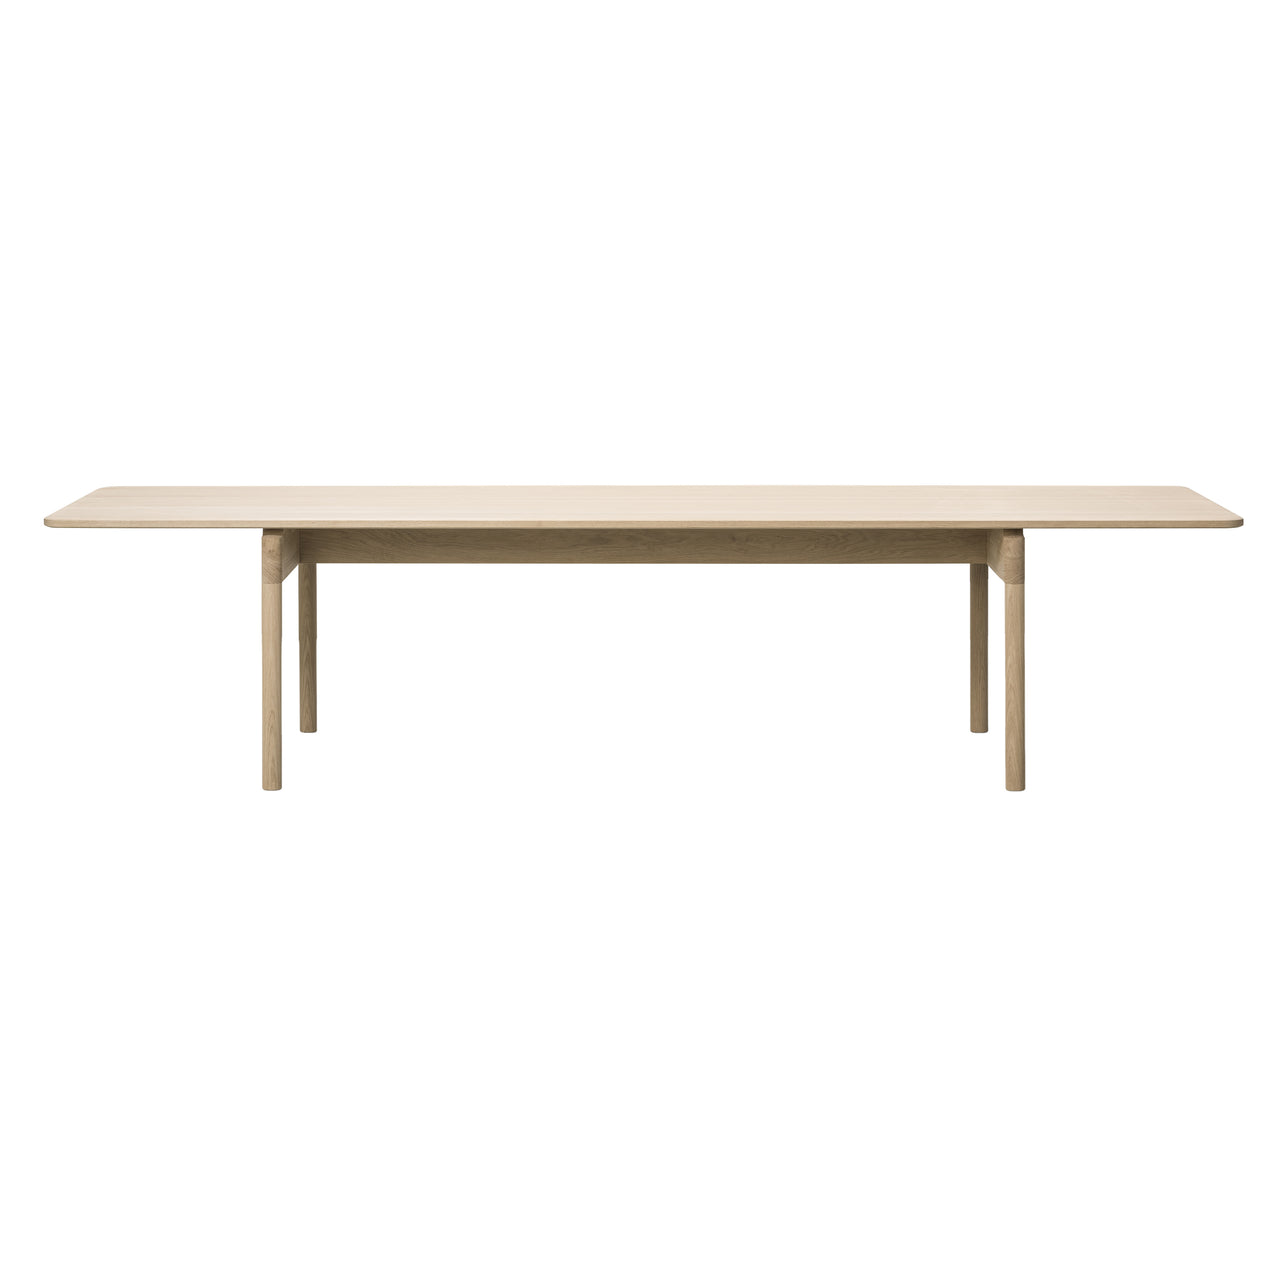 Post Dining Table: Large - 126